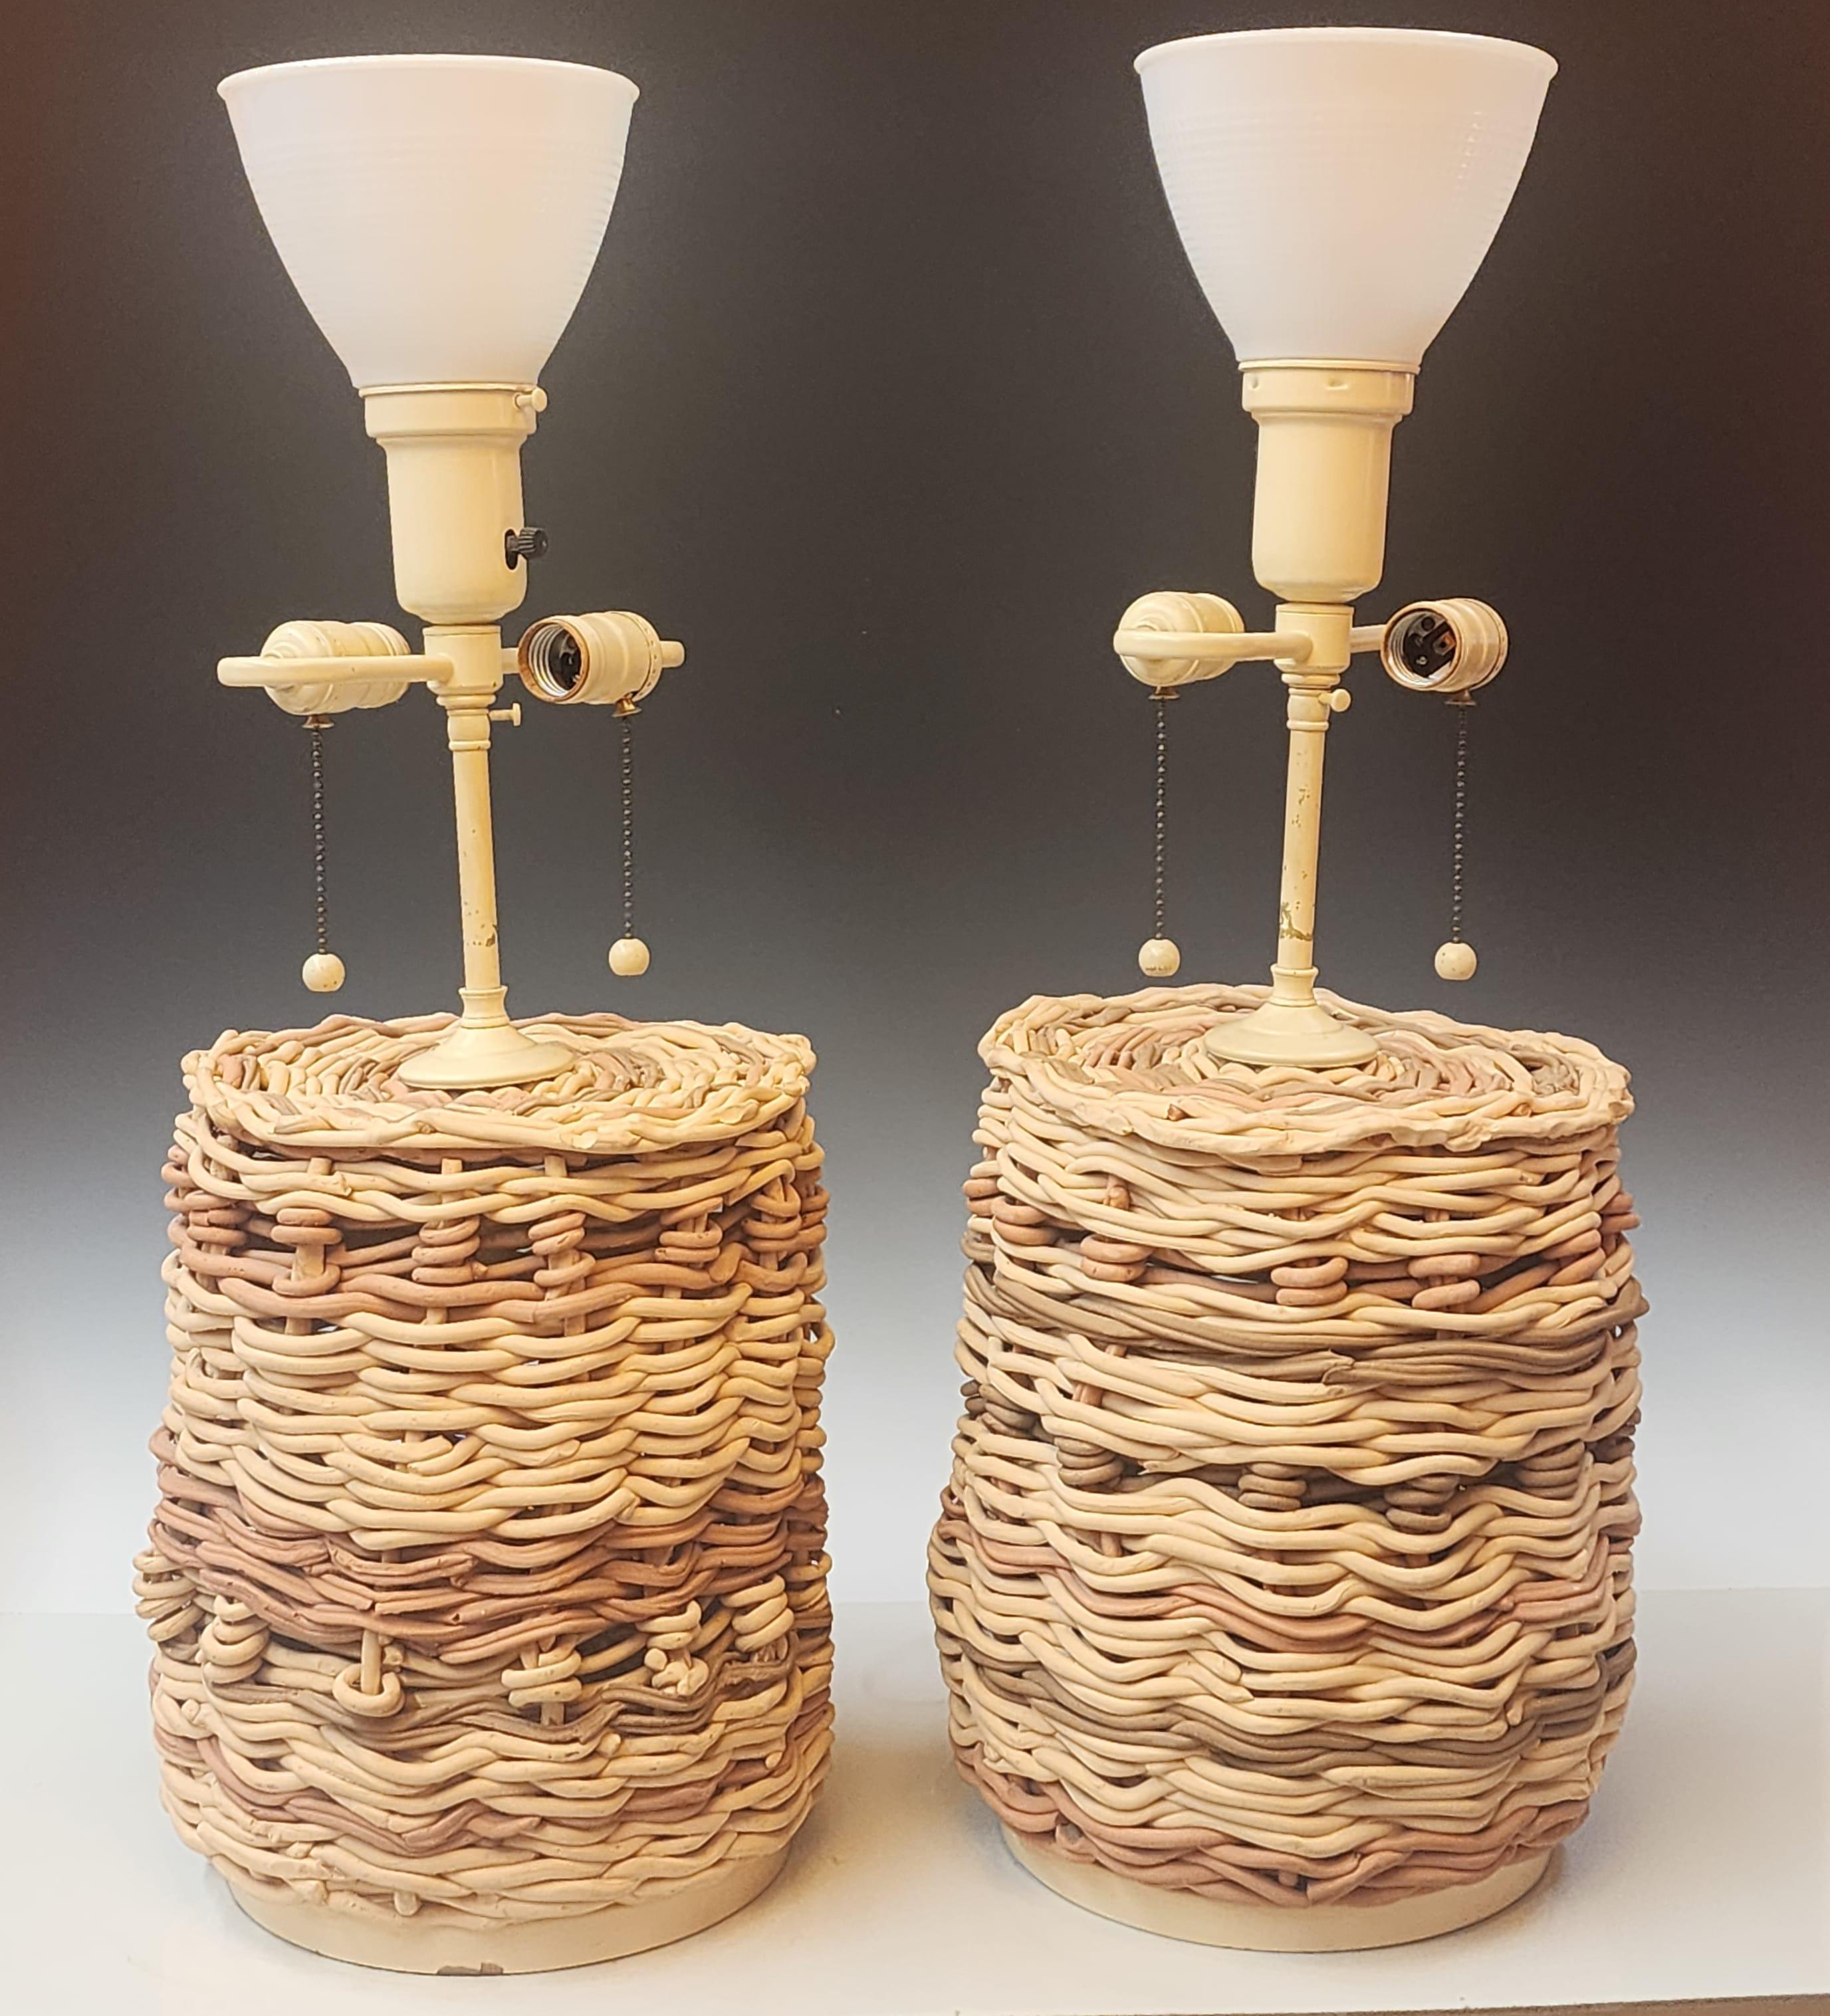 Pair of woven pottery lamps attributed to Samuel Marx circa 1950.   Fresh from a Chicago estate.   Amazing woven pottery bases made to look like wicker baskets.   While reminiscent of a later lamp 1975 designed by John Dickinson done in plaster 